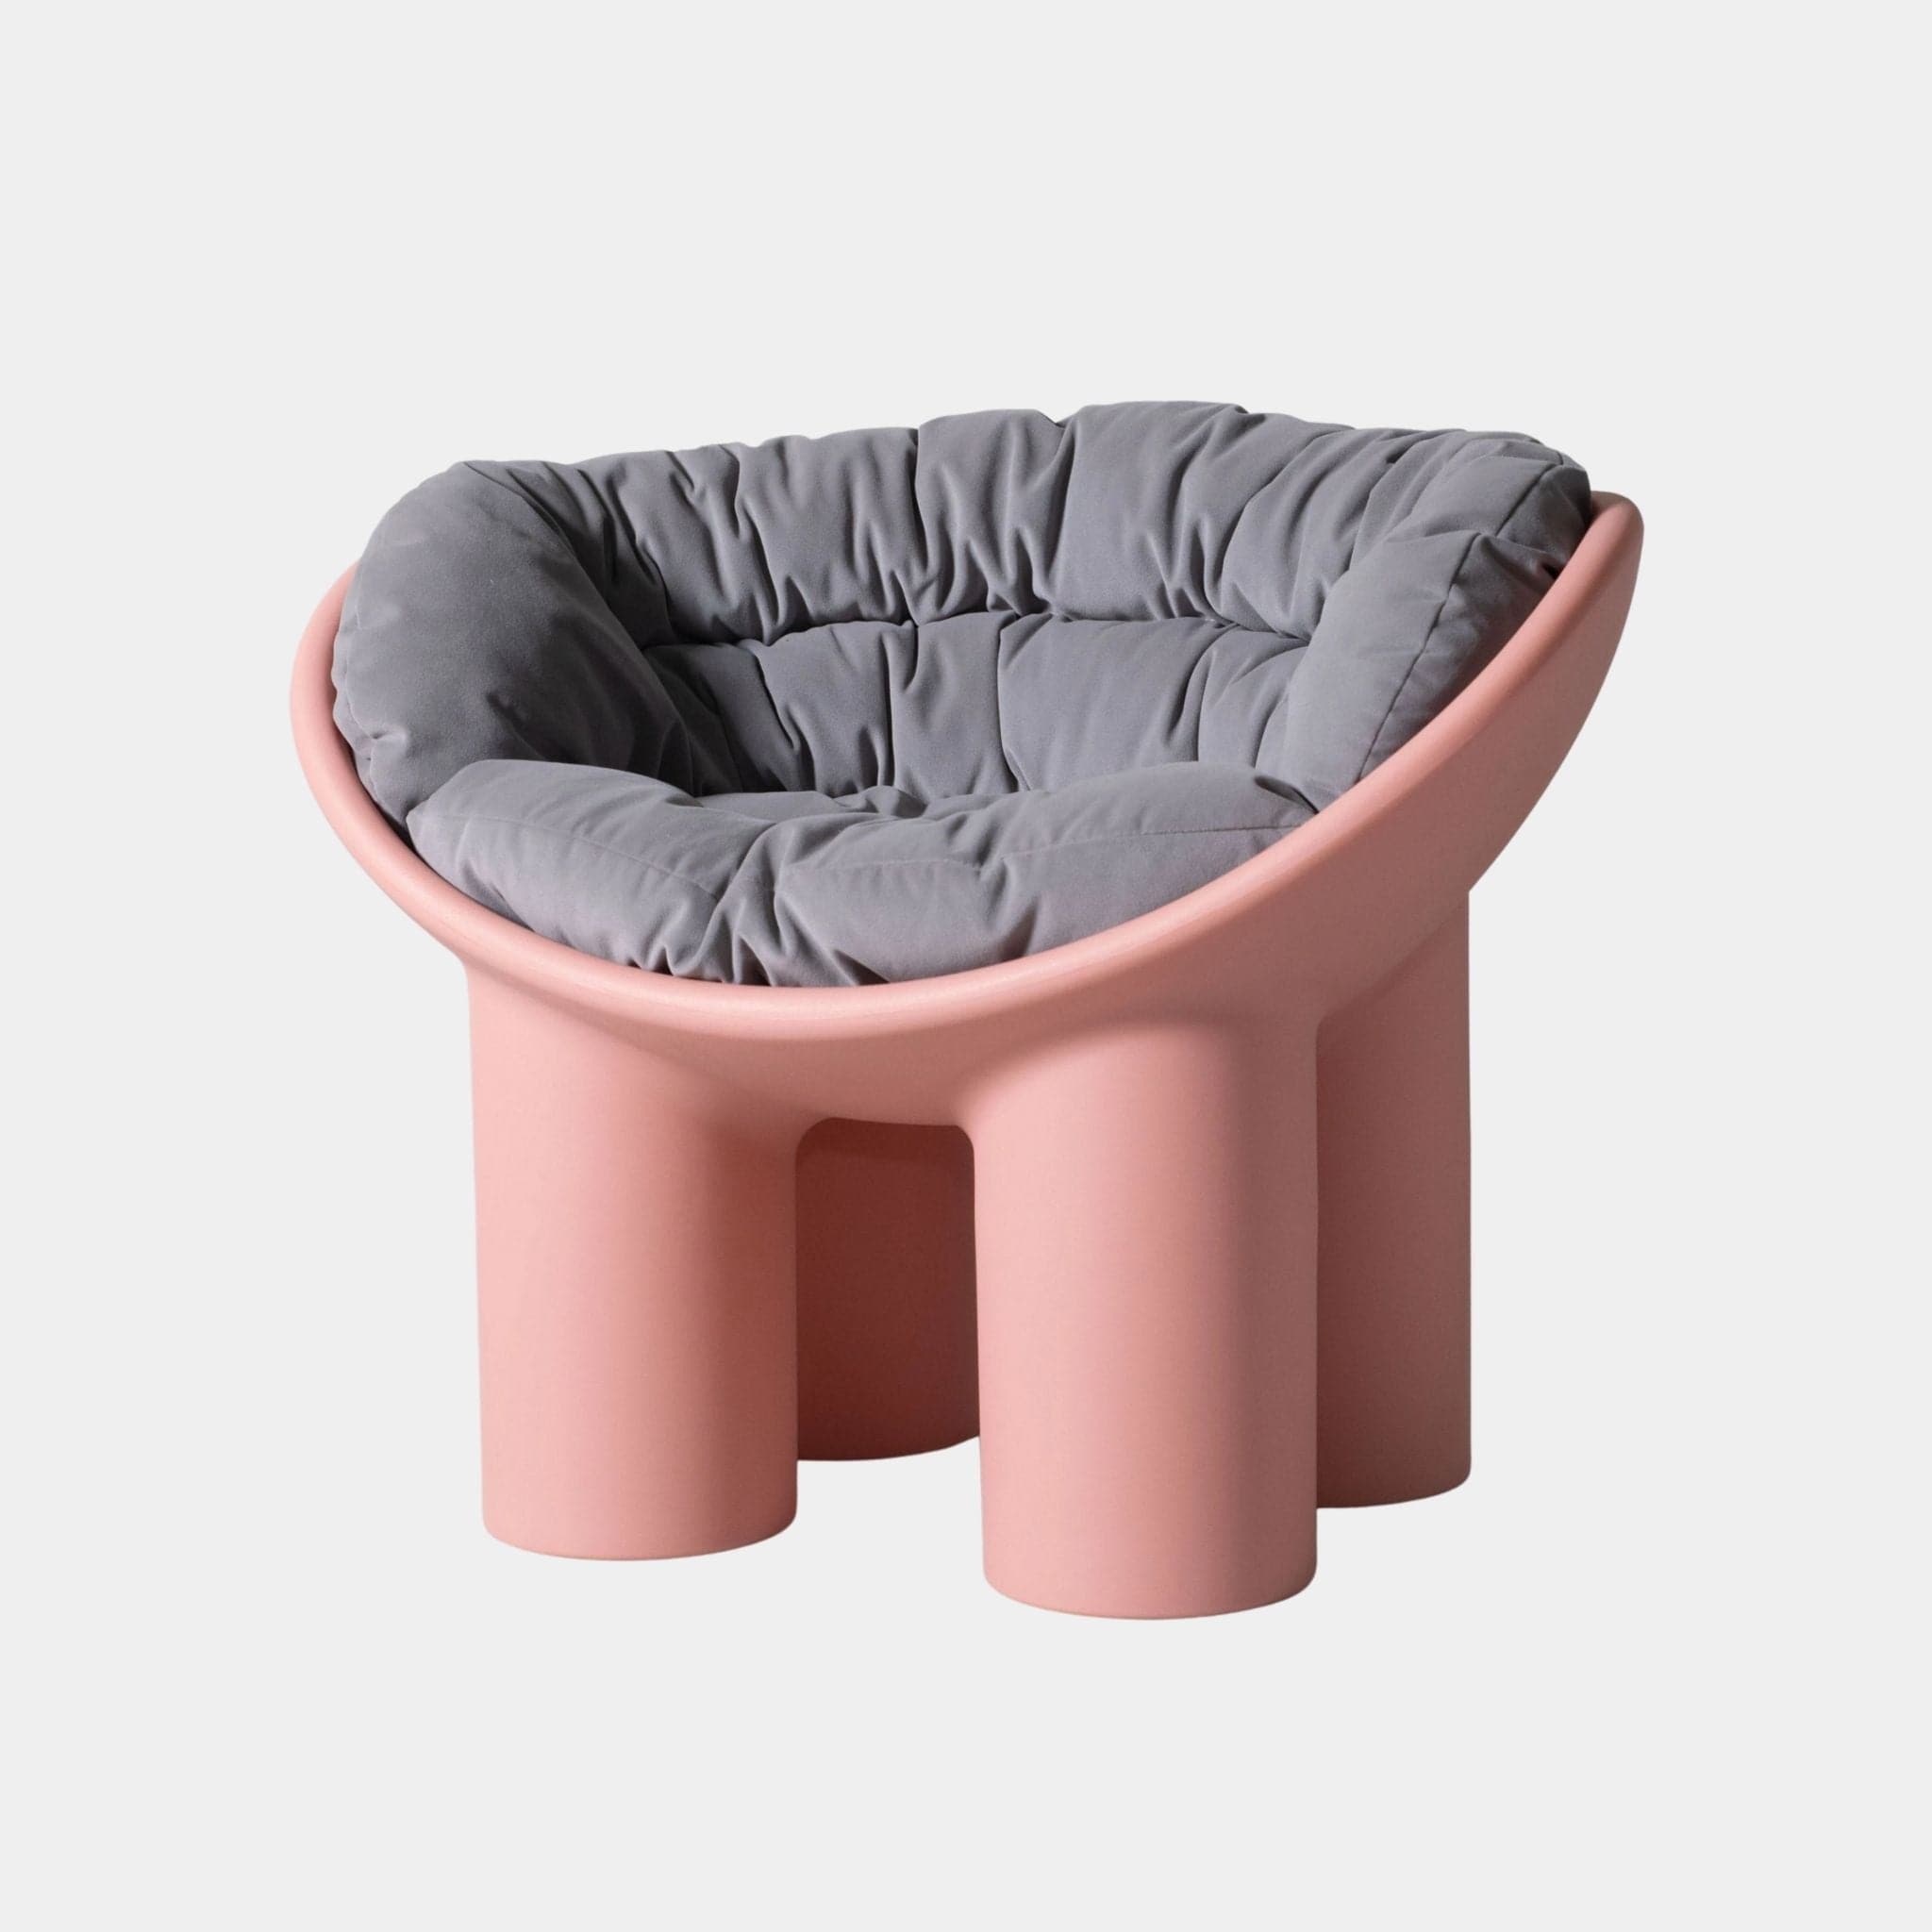 roly poly chair replica